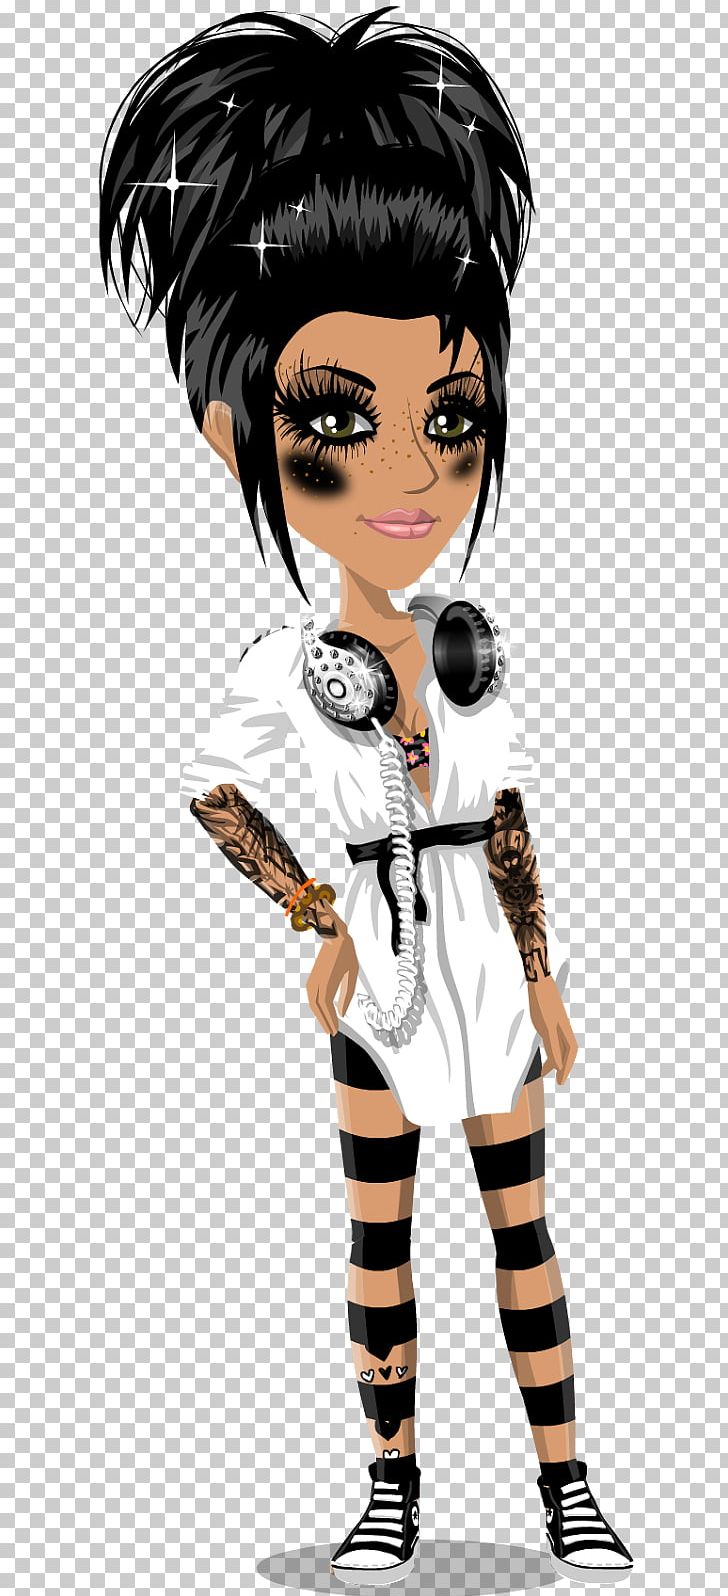 MovieStarPlanet Blogger Avatar PNG, Clipart, Anime, Art, Avatar, Beauty, Black Hair Free PNG Download